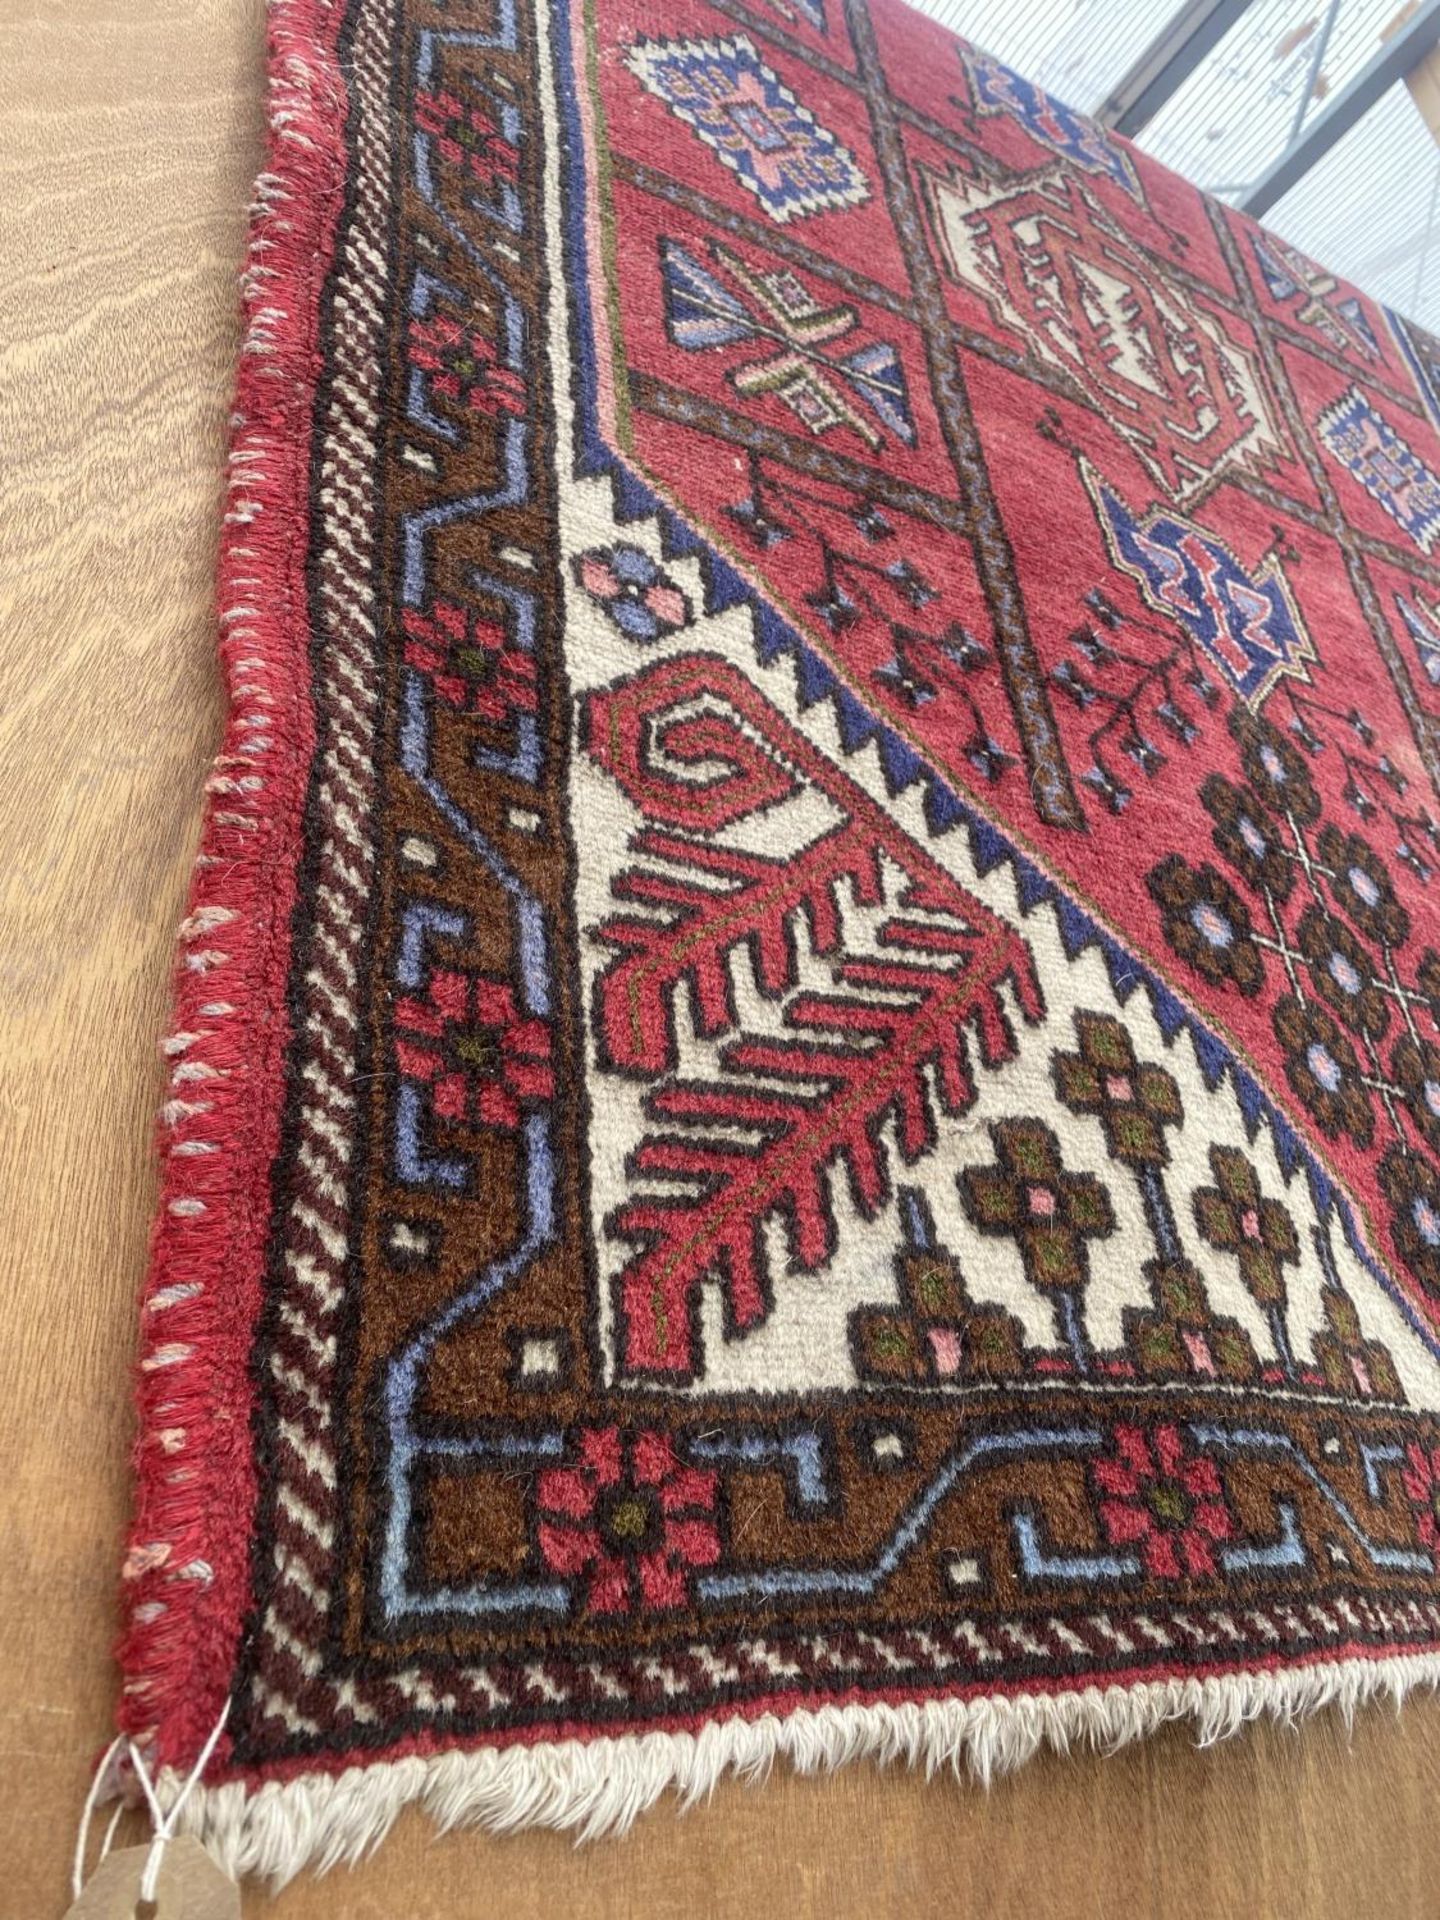 A LARGE RED PATTERNED FRINGED RUG - Image 2 of 2